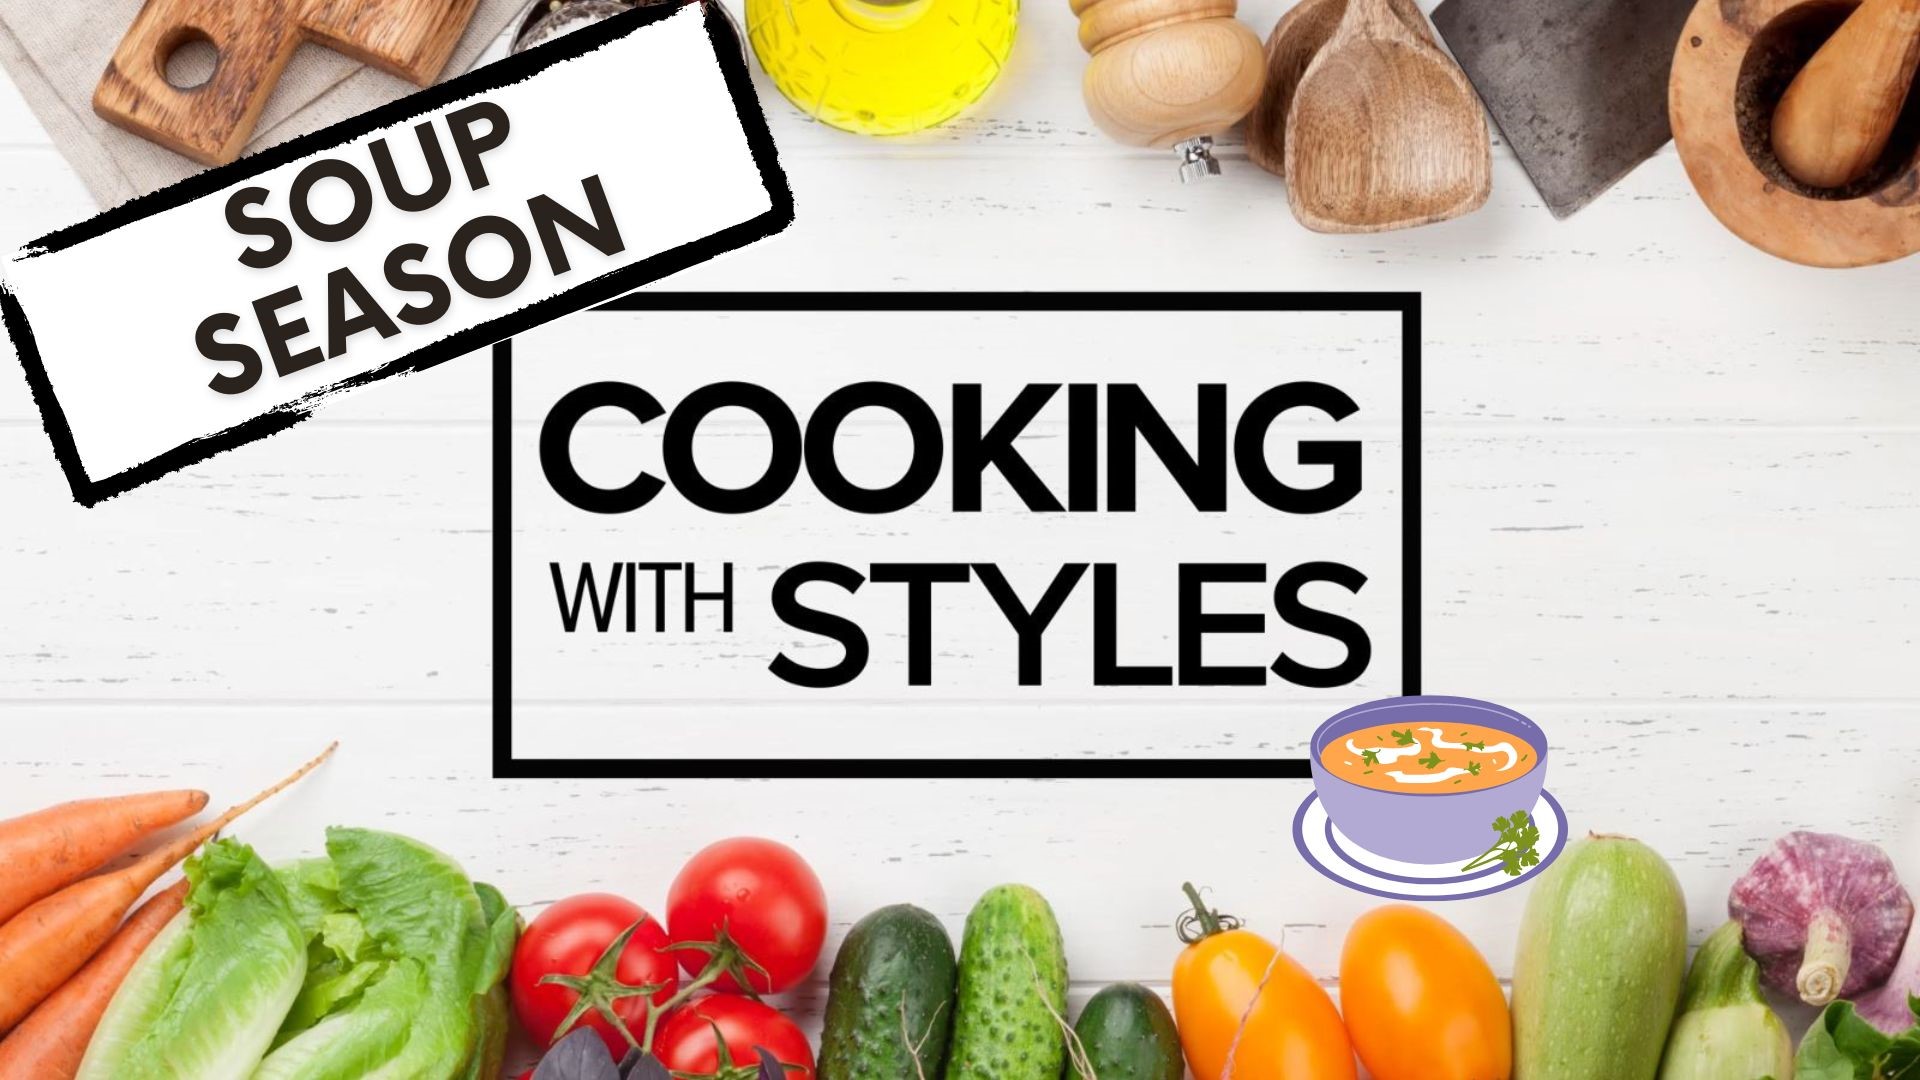 KFMB's Shawn Styles shares some classic soup, stew and chili recipes to help you warm up this season.